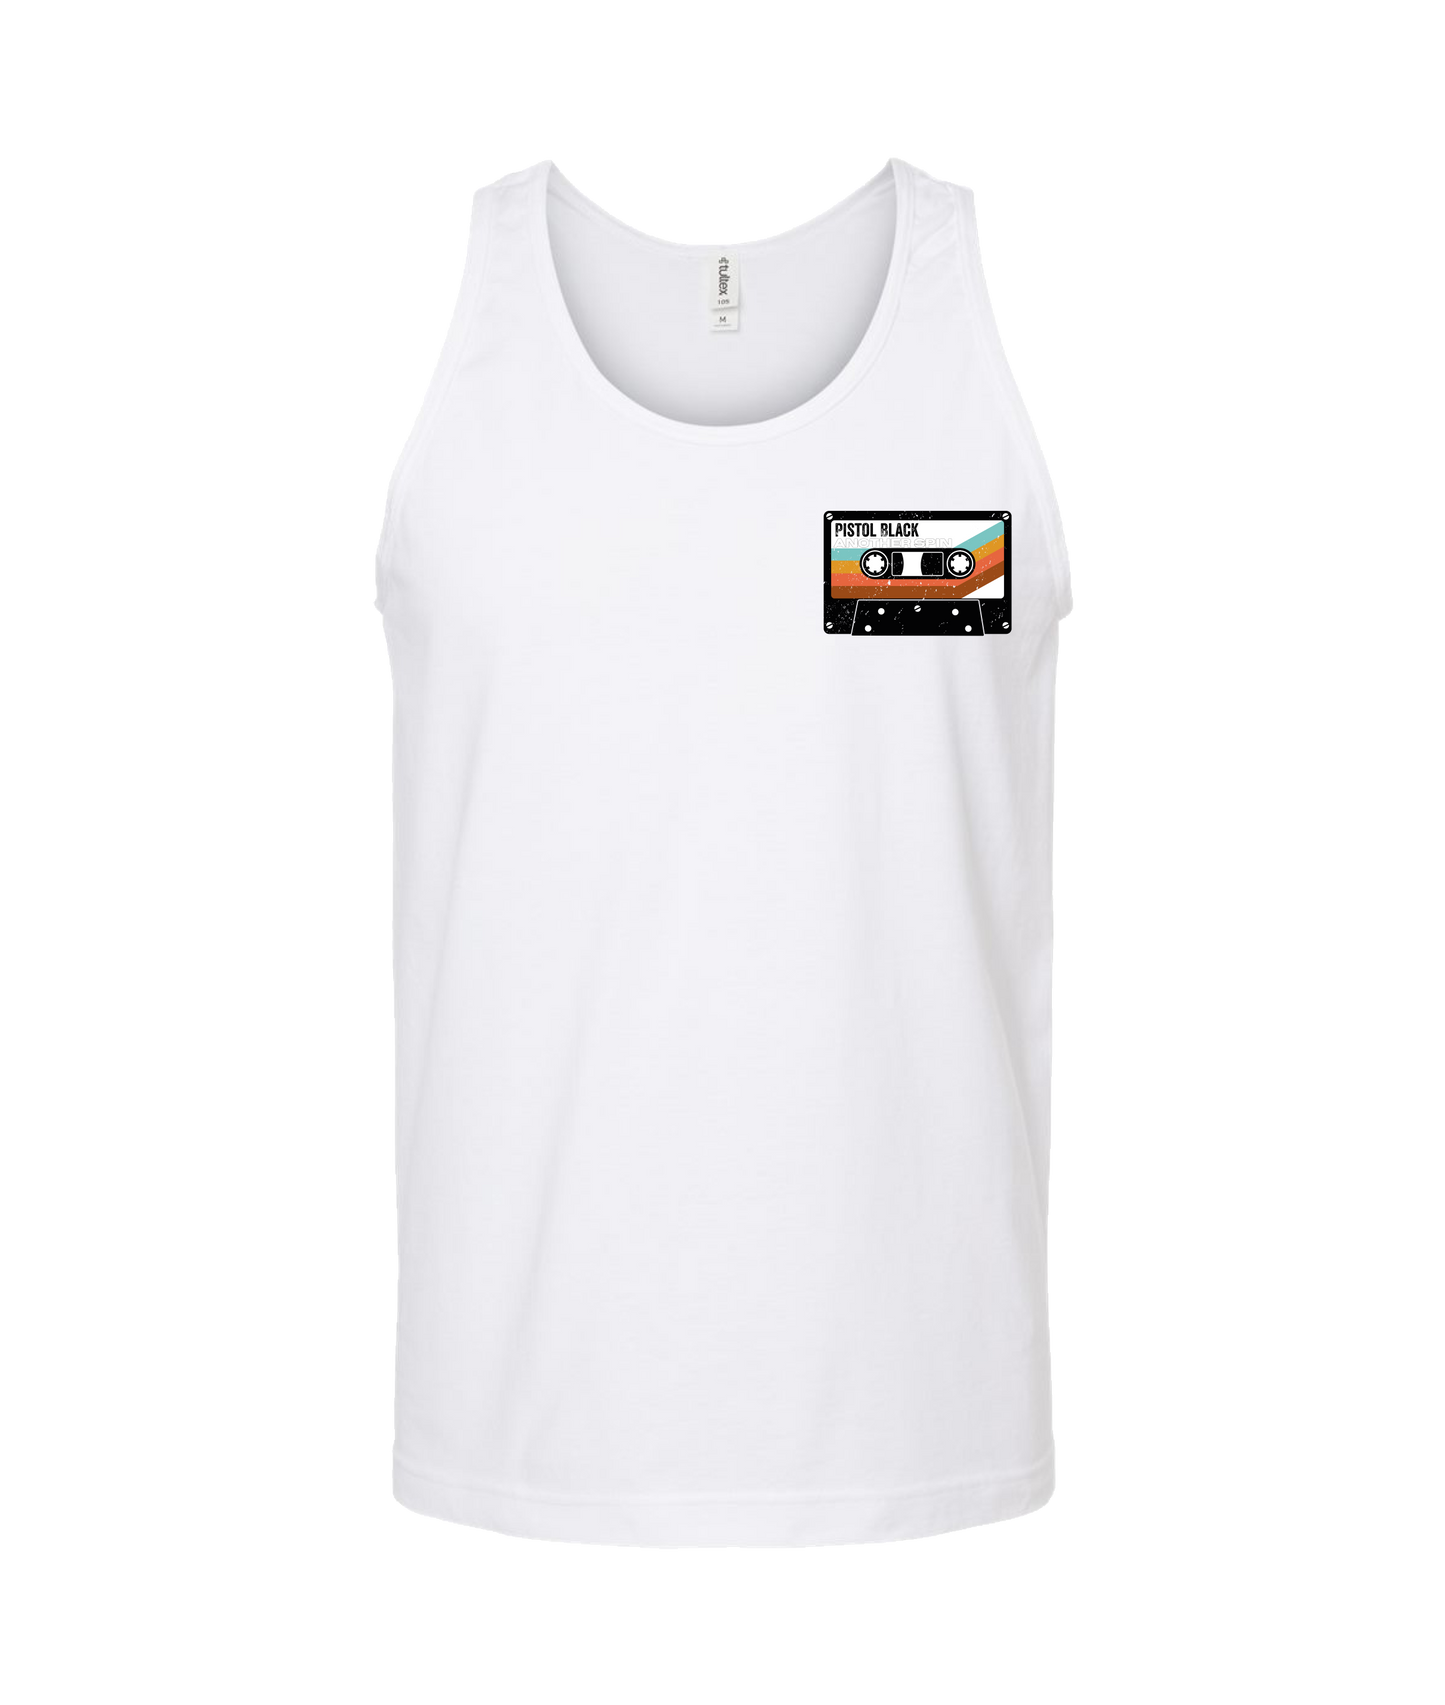 Pistol Black - Another Spin - White Tank Top